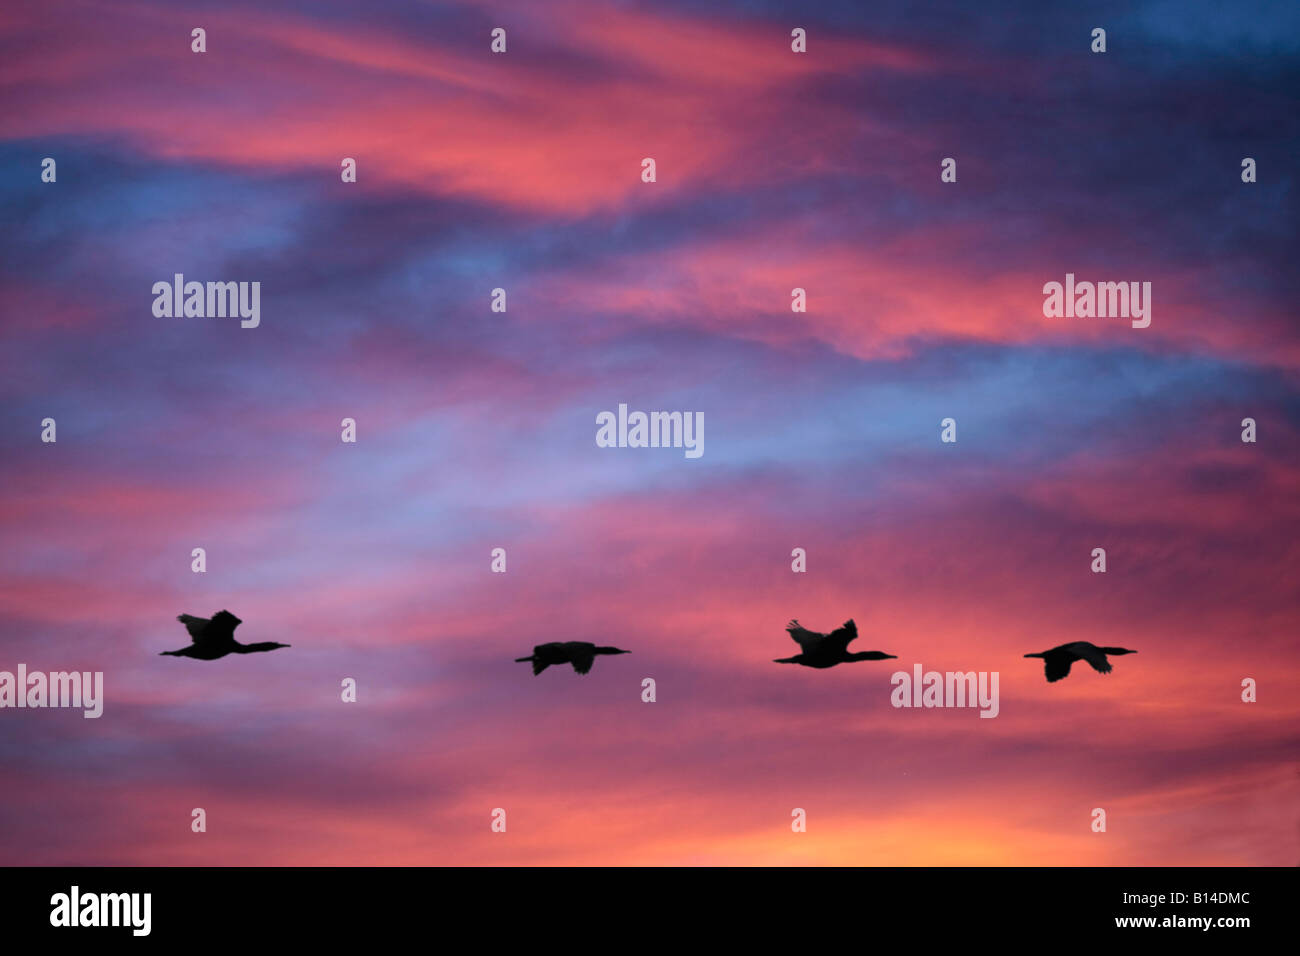 Cormorants in Silhouette against clouds at sunset Stock Photo